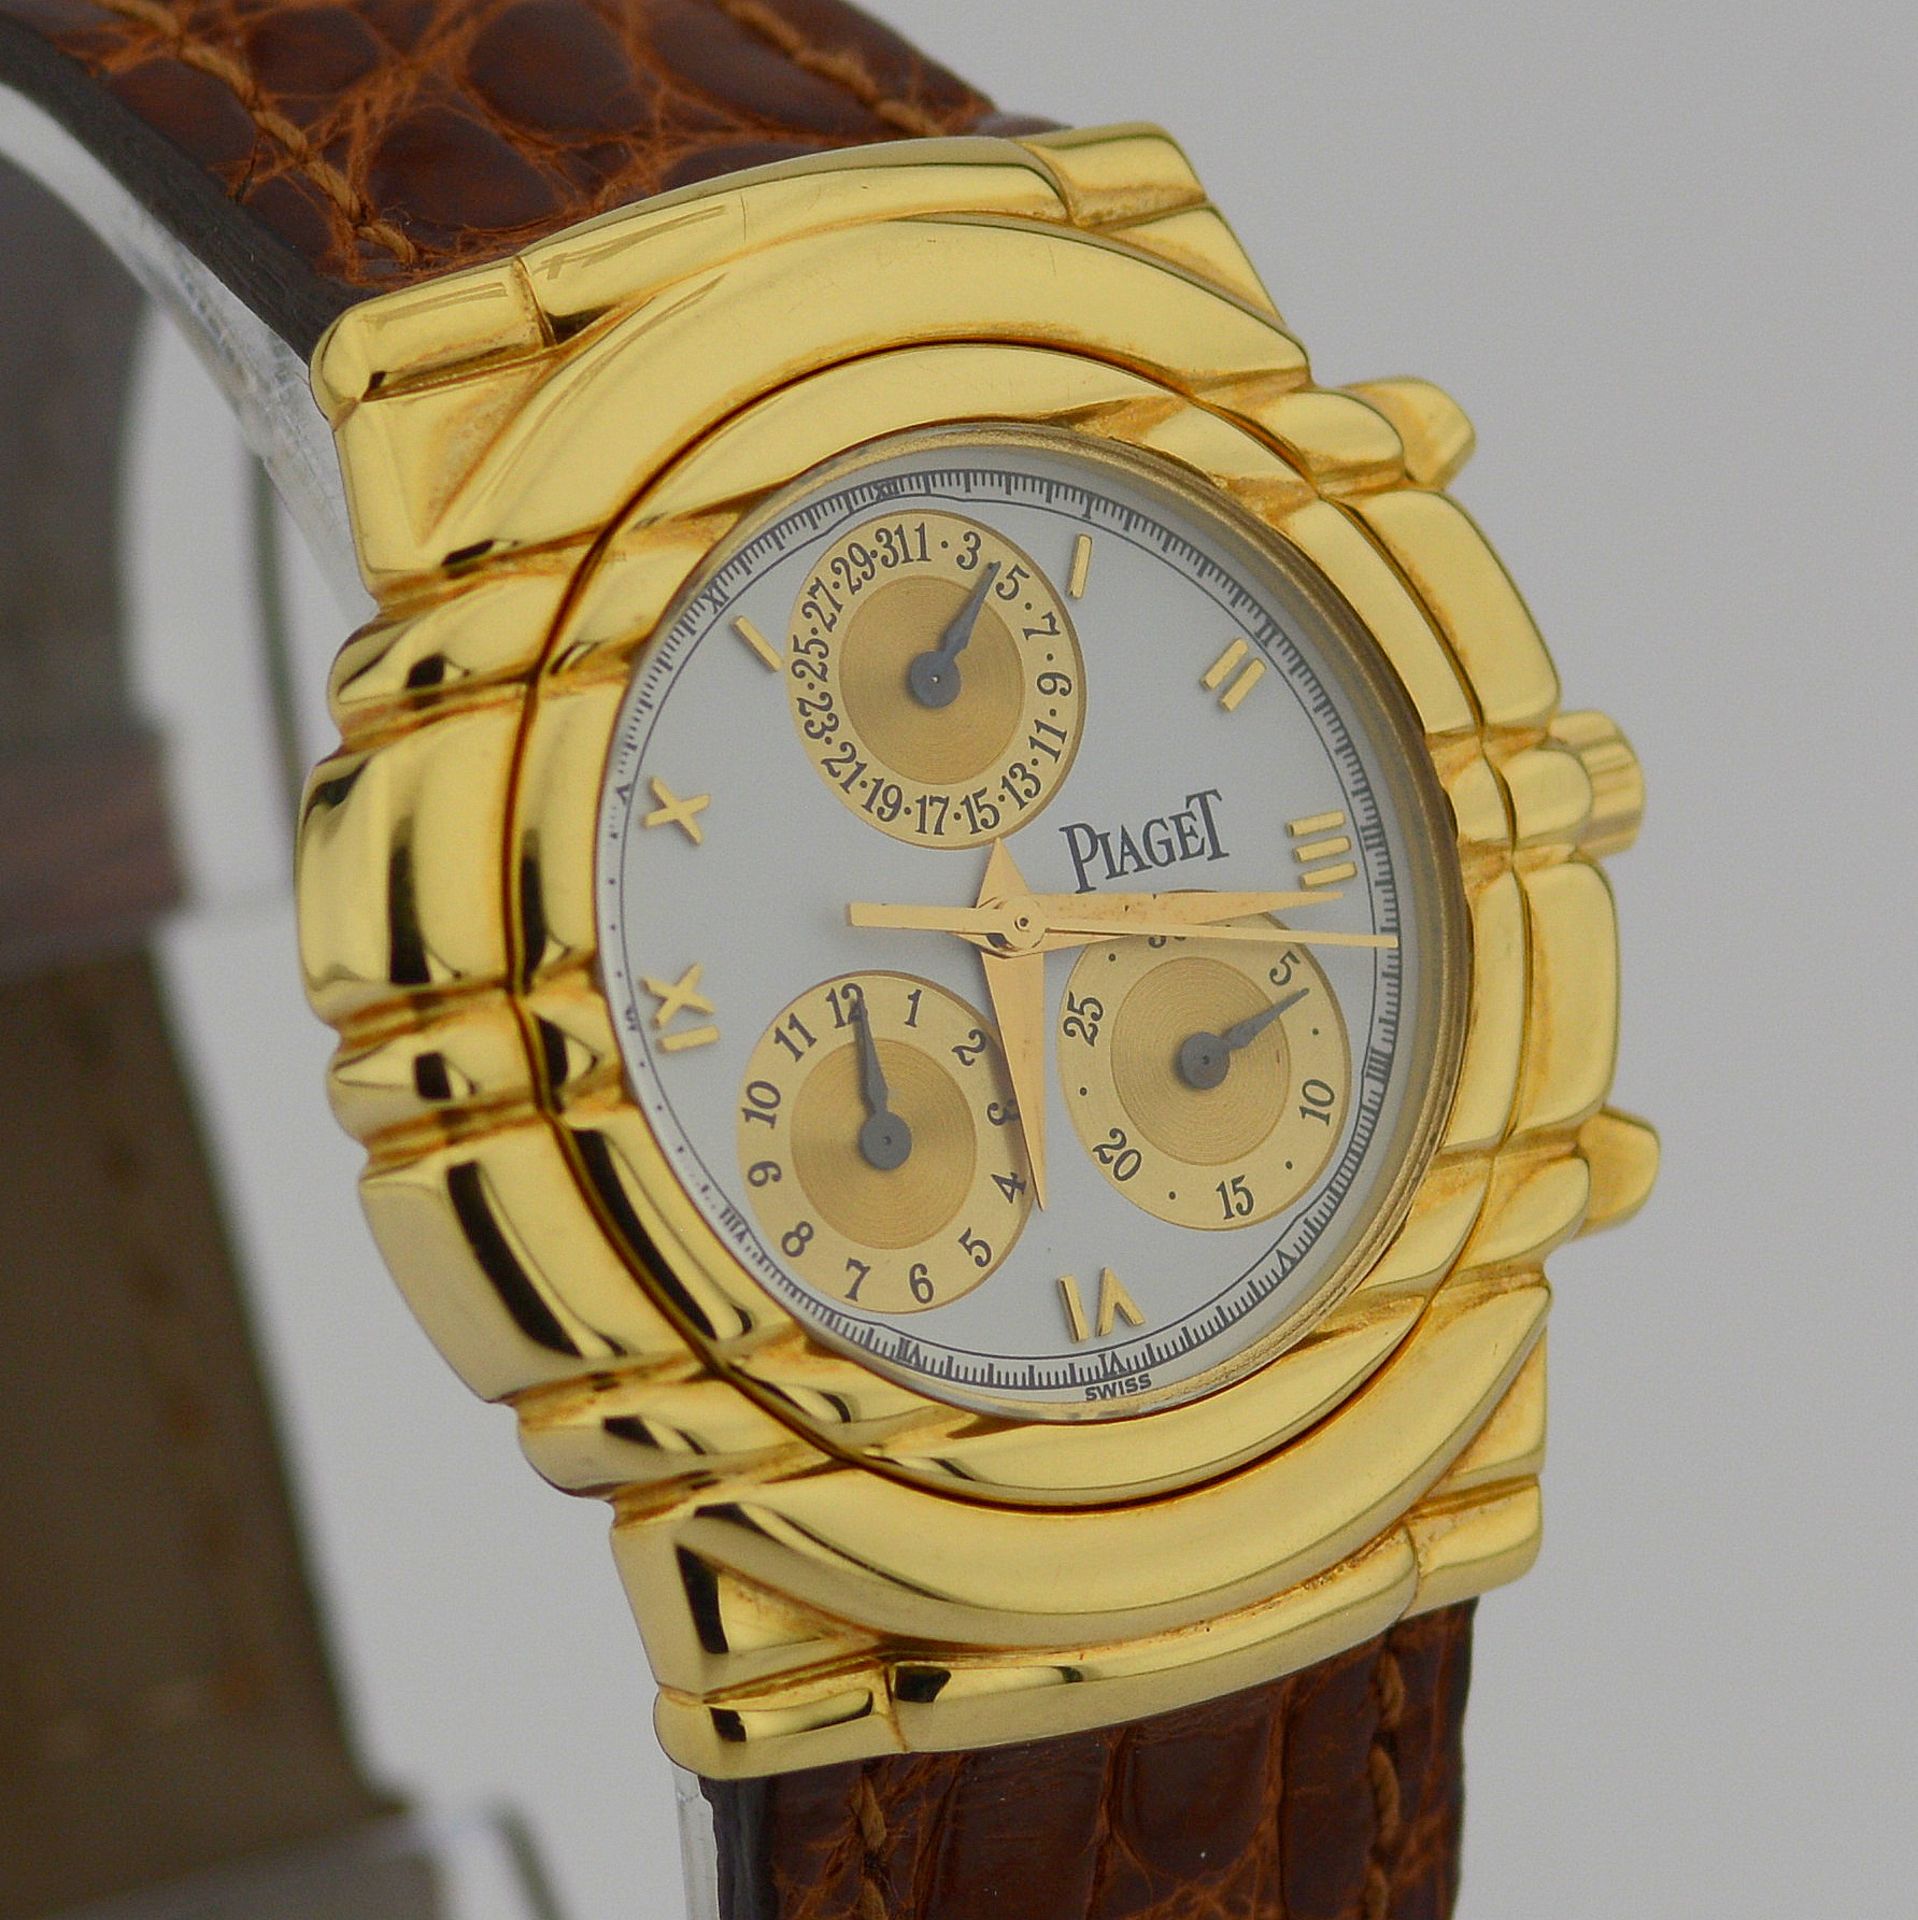 Piaget / Tanagra Chronograph - Lady's Yellow gold Wrist Watch - Image 10 of 15